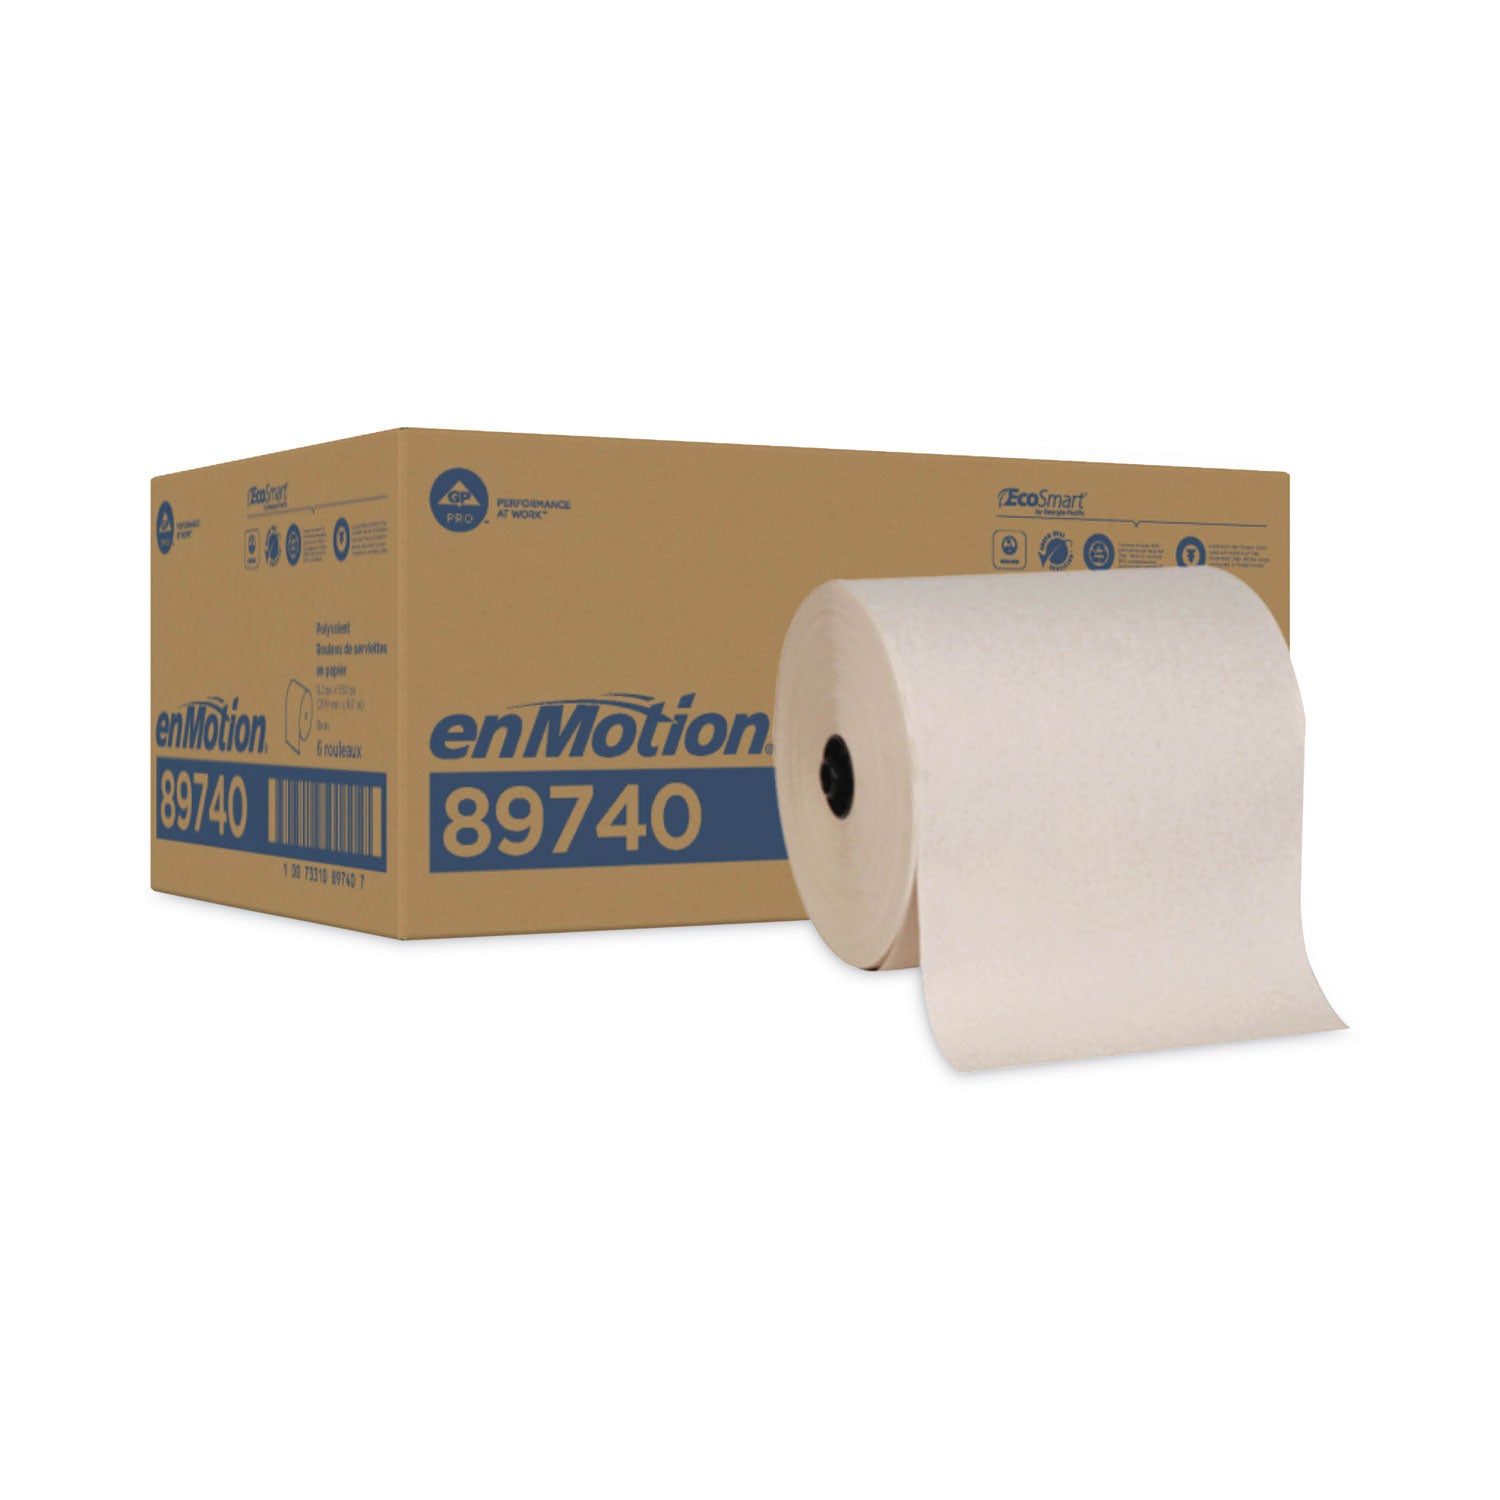 enMotion Flex Recycled Paper Towel Rolls - 550 Sheets/Roll - Brown - For Hand - 6 Rolls Per Case - 6 / Carton - 2